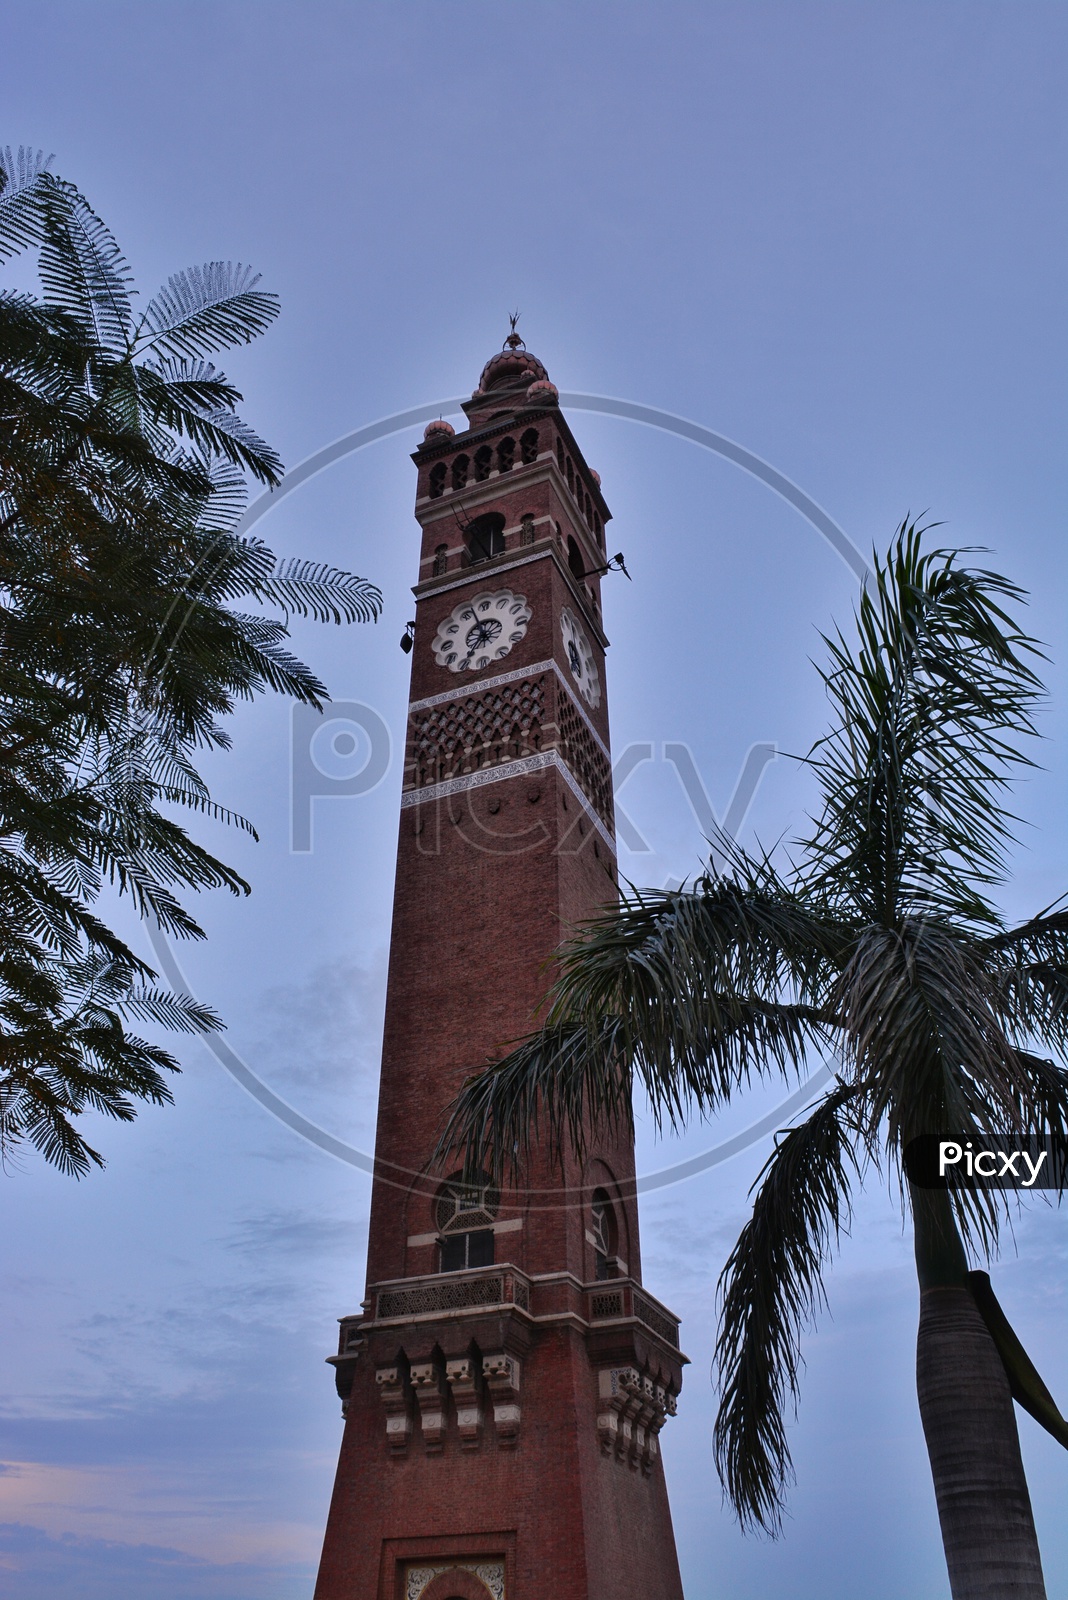 HUSSAINABAD CLOCK TOWER, LUCKNOW